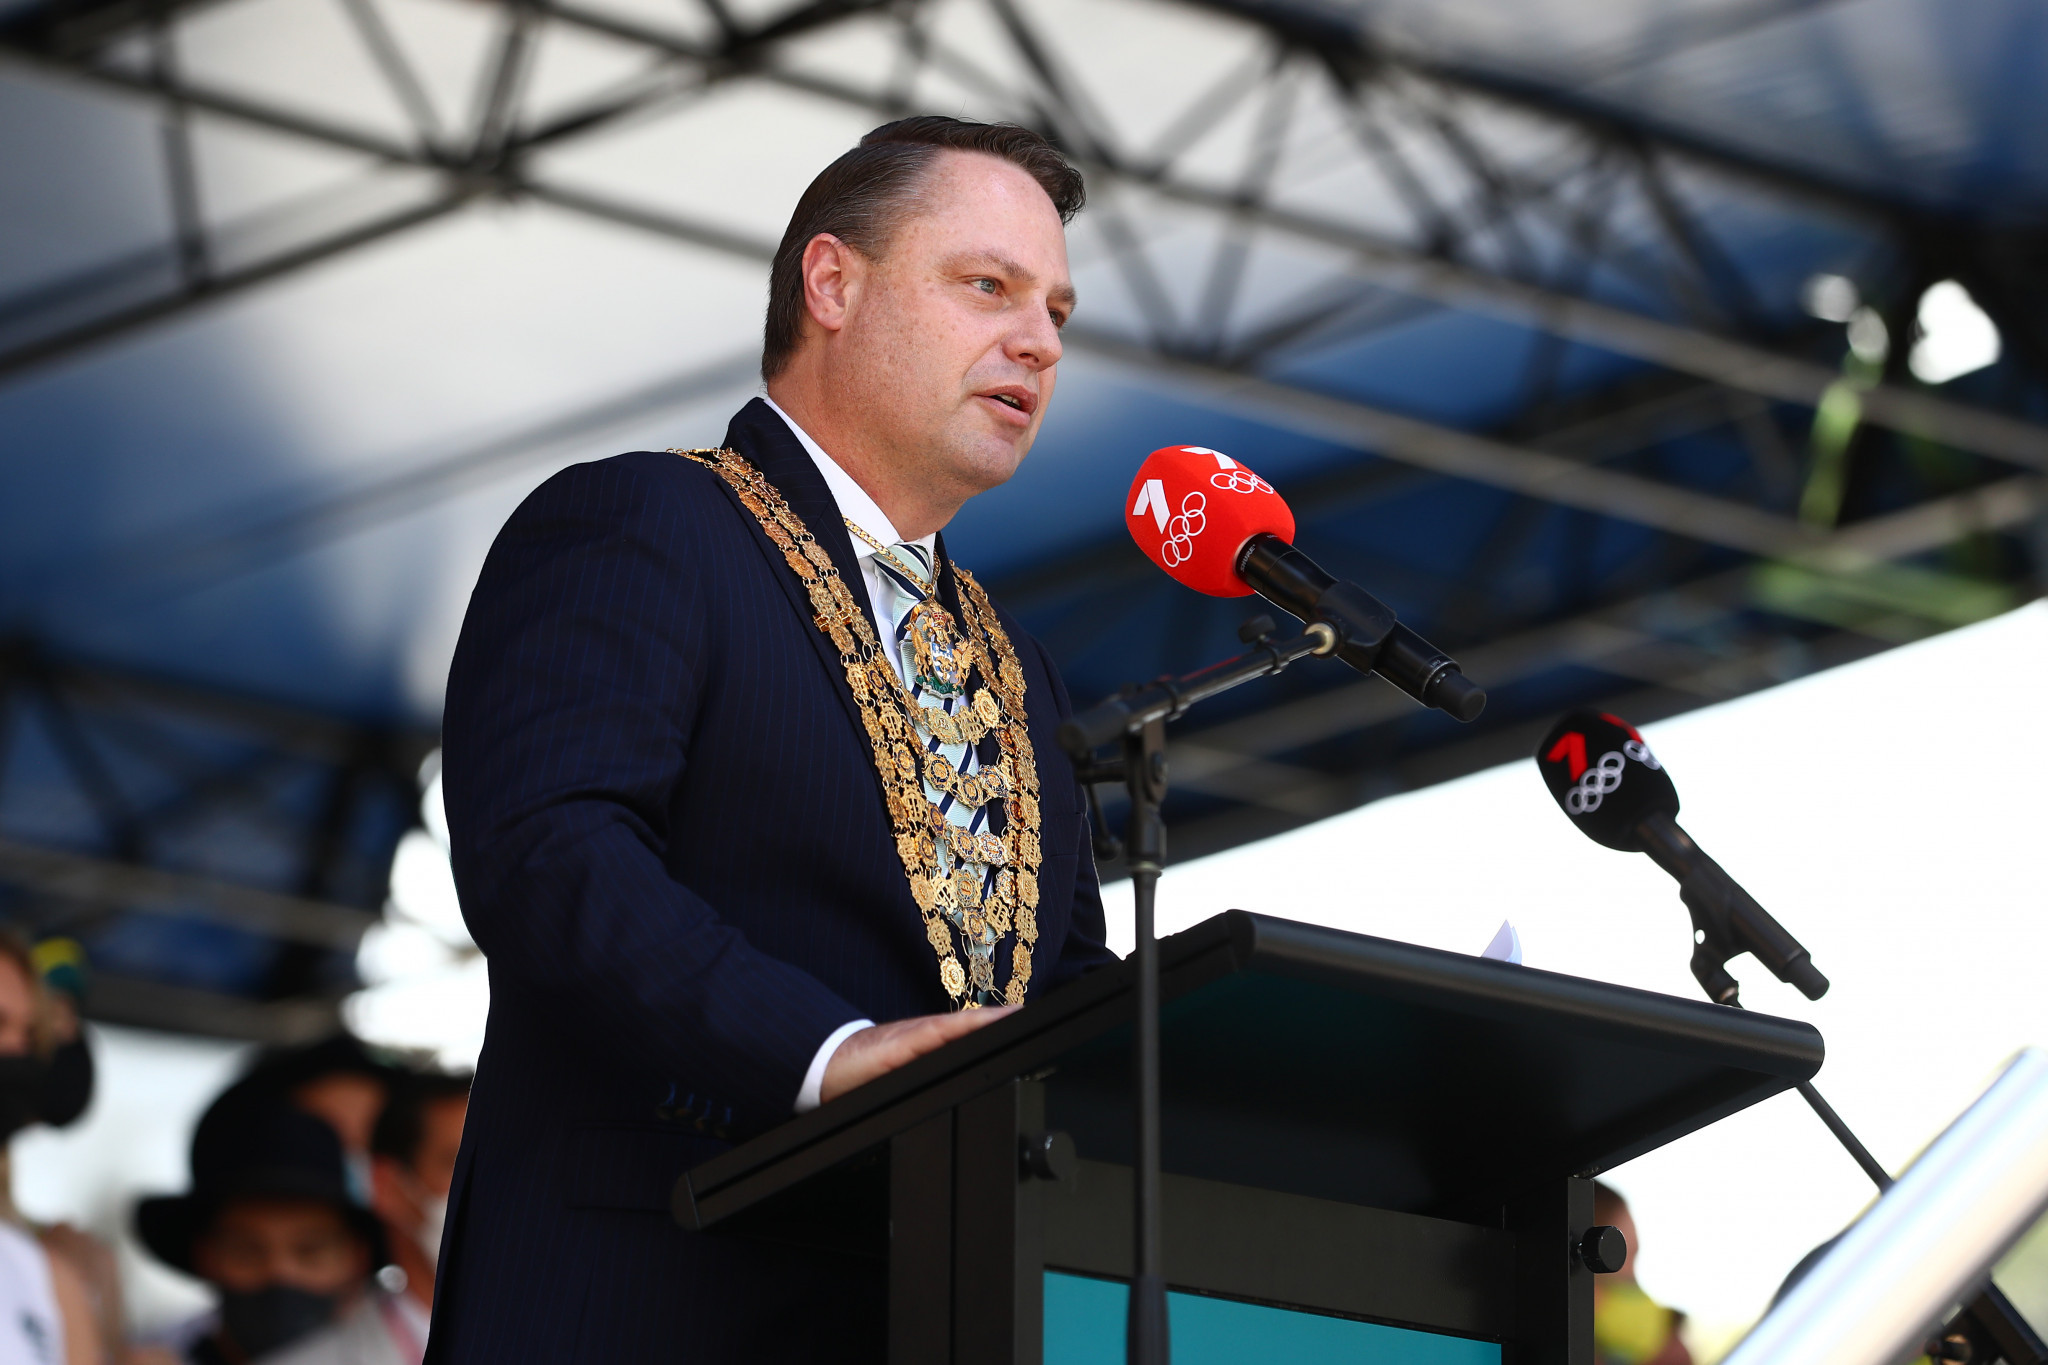 Brisbane Mayor Adrian Schrinner says he is concerned at the pace of preparations for the Brisbane 2032 Olympics and Paralympics, claiming it is 